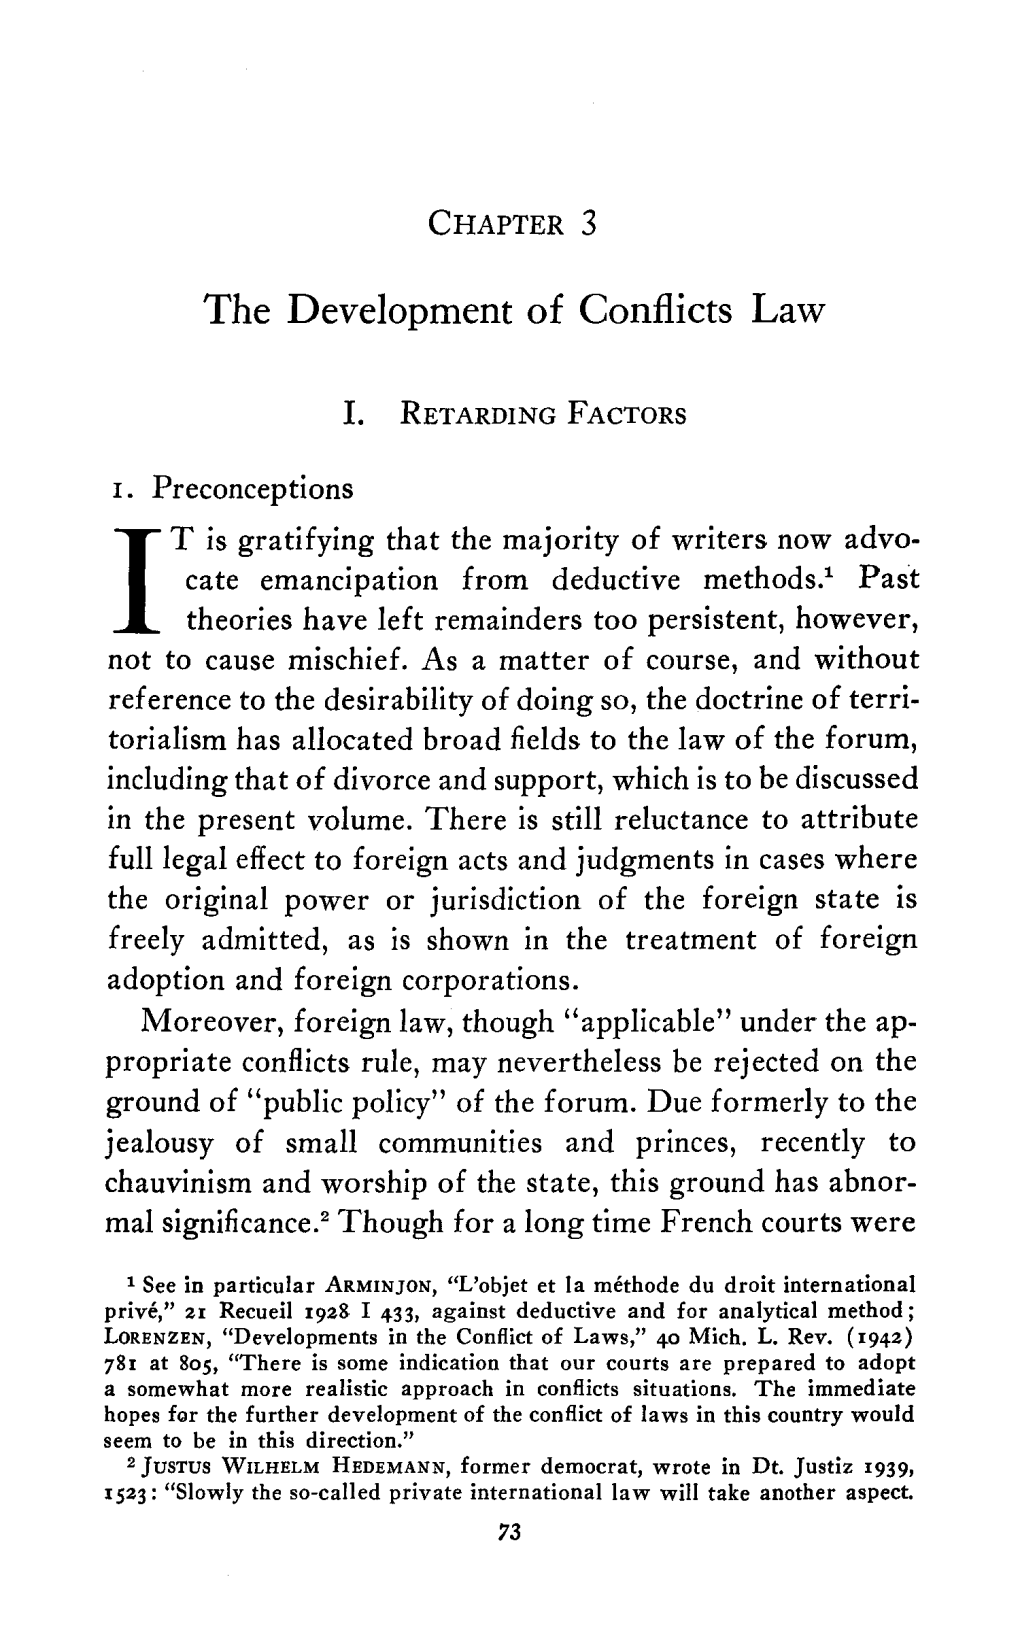 The Development of Conflicts Law